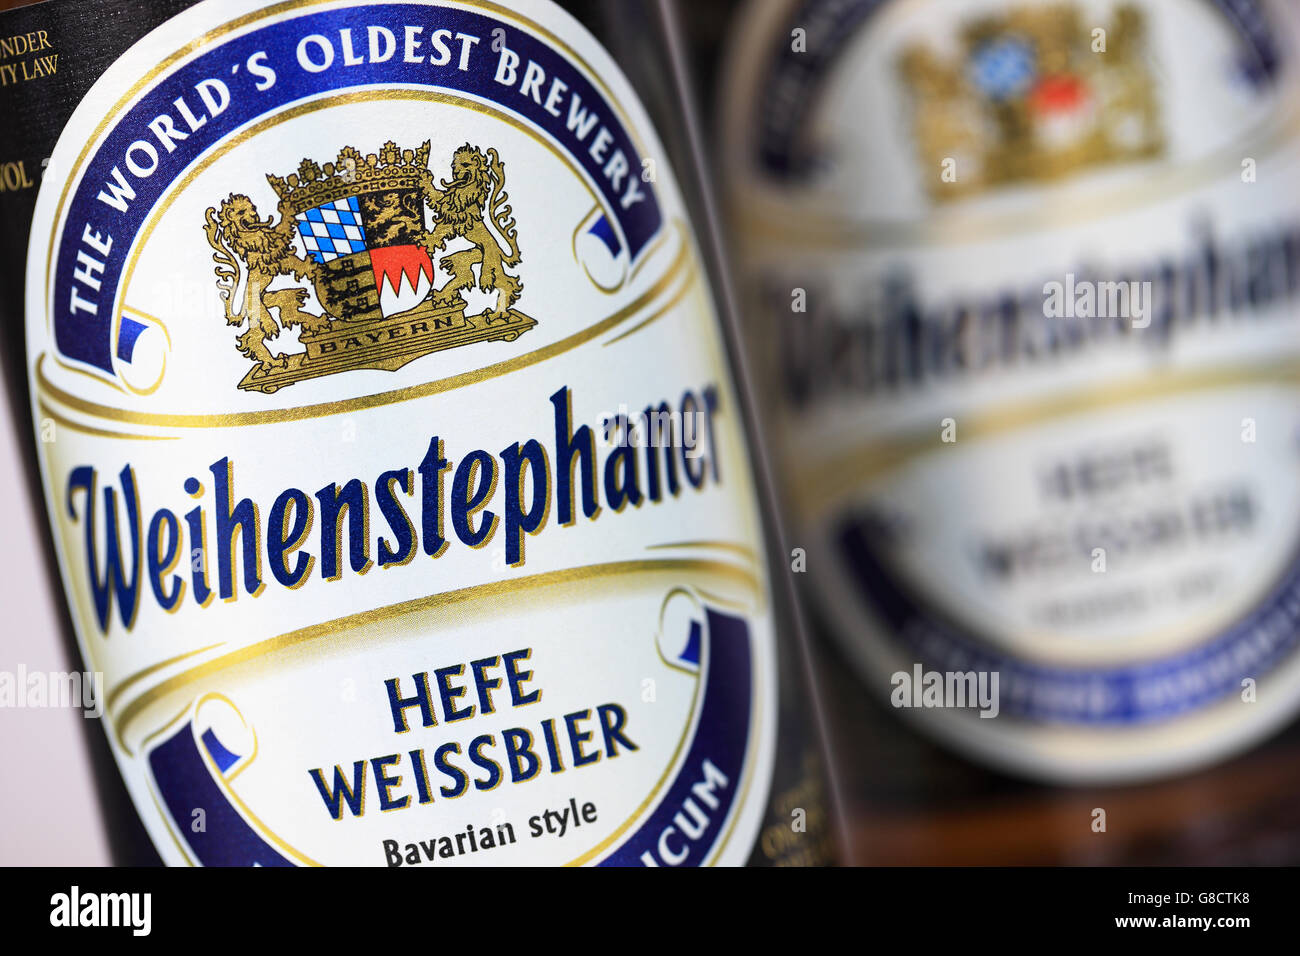 Bavarian beer Weihenstephaner from the World's Oldest Brewery in Germany Stock Photo